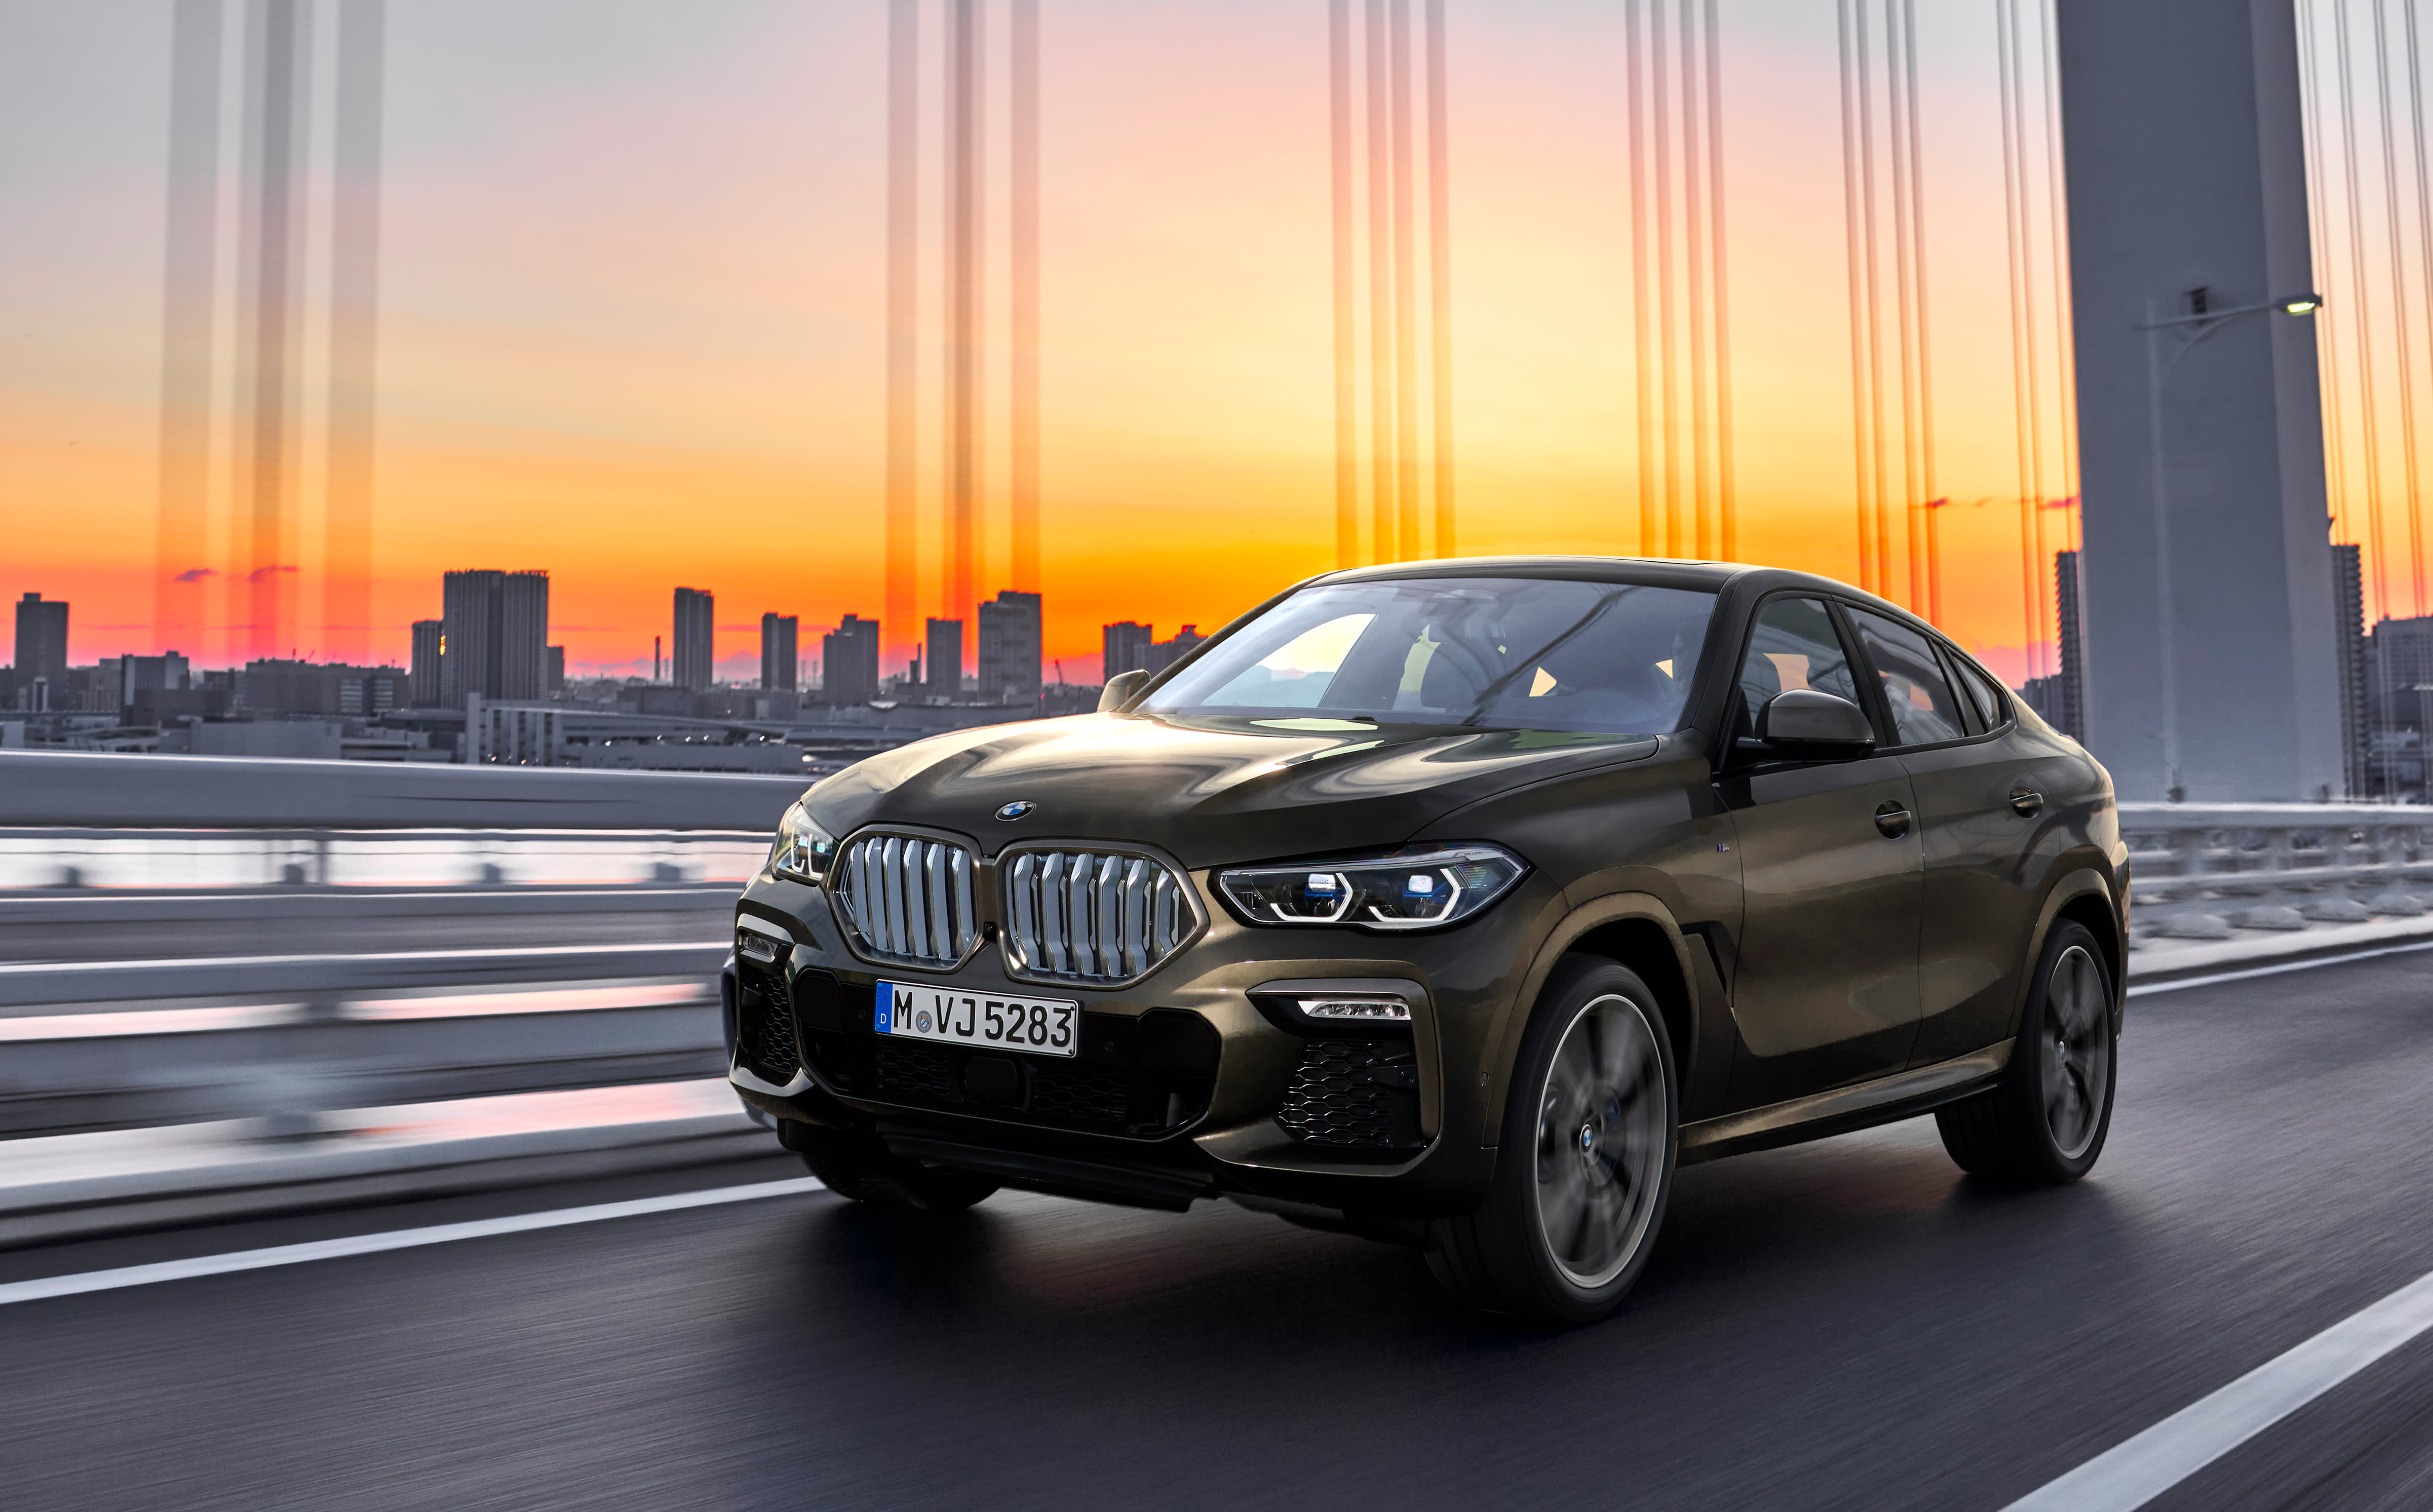 BMW gives its trendsetting 2020 X6 crossover a major makeover in